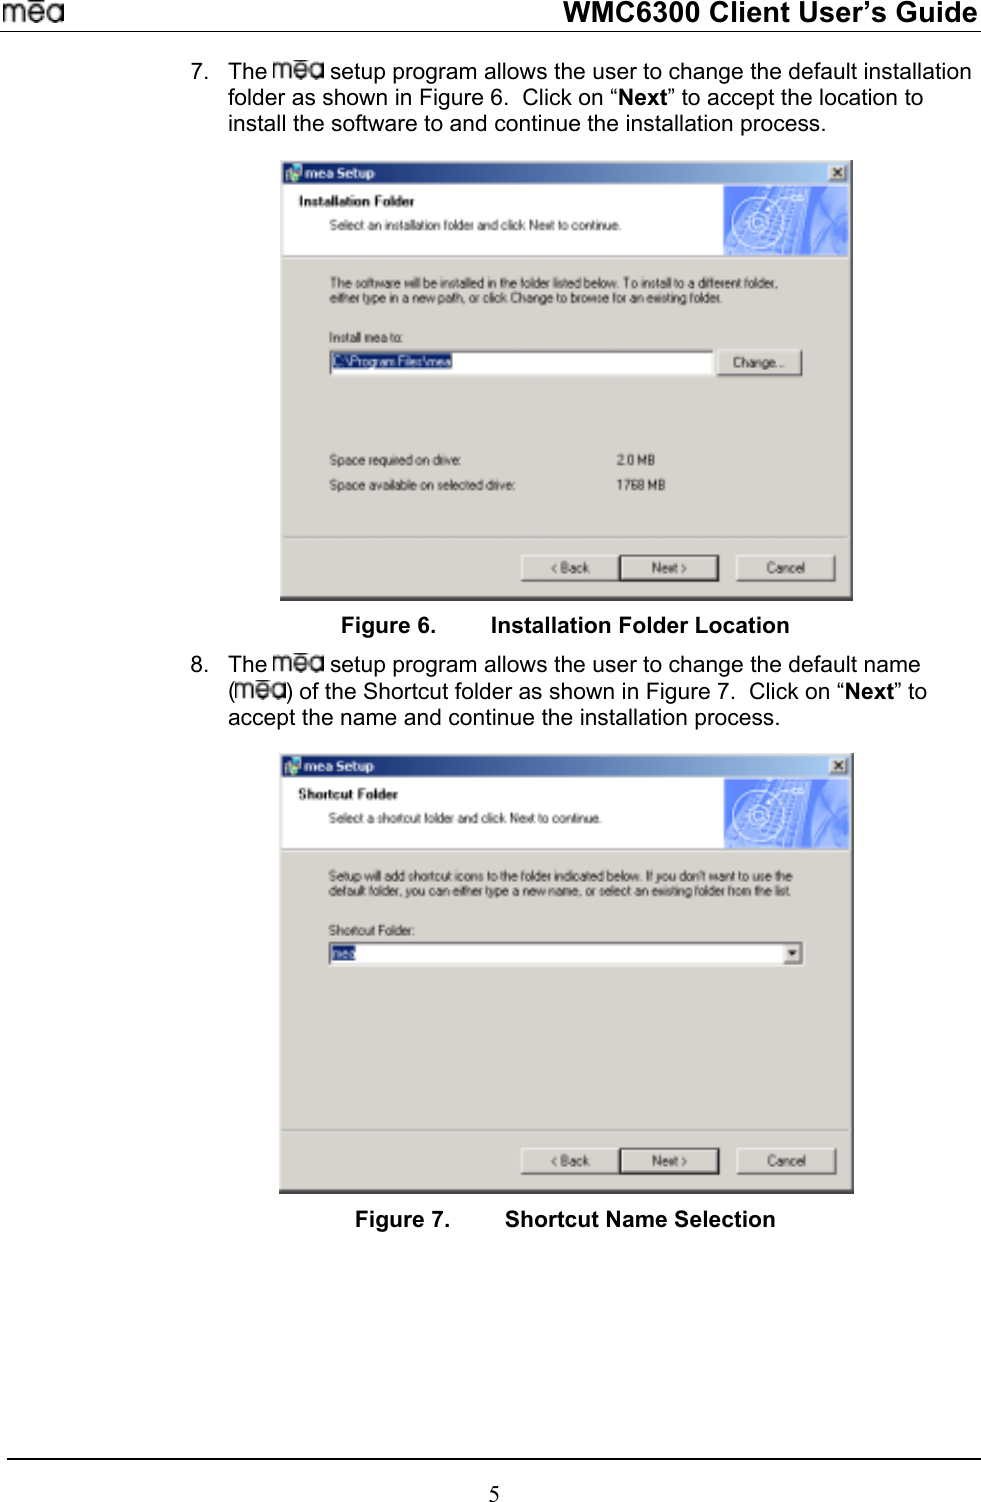     WMC6300 Client User’s Guide 7. The   setup program allows the user to change the default installation folder as shown in Figure 6.  Click on “Next” to accept the location to install the software to and continue the installation process.    Figure 6.  Installation Folder Location 8. The   setup program allows the user to change the default name () of the Shortcut folder as shown in Figure 7.  Click on “Next” to accept the name and continue the installation process.    Figure 7.  Shortcut Name Selection 5 